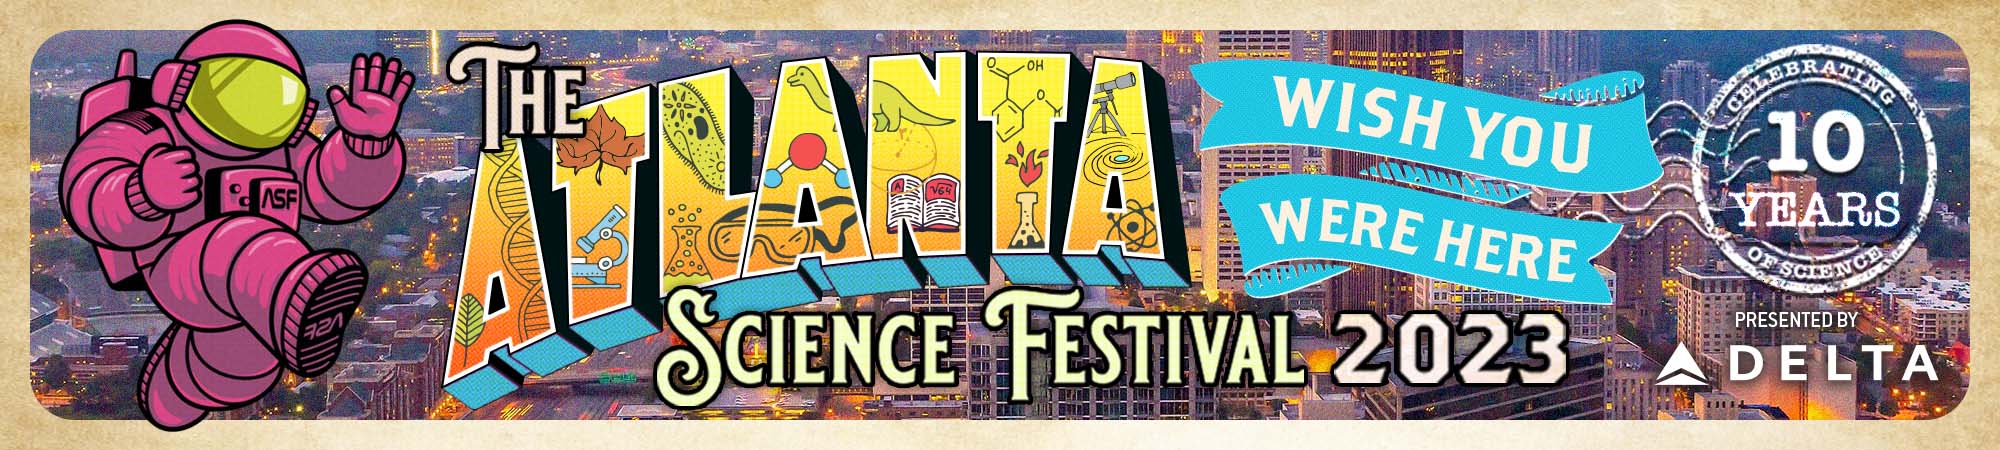 The Atlanta Science Festival 2023, Presented by Delta. Celebrating 10 years of science.